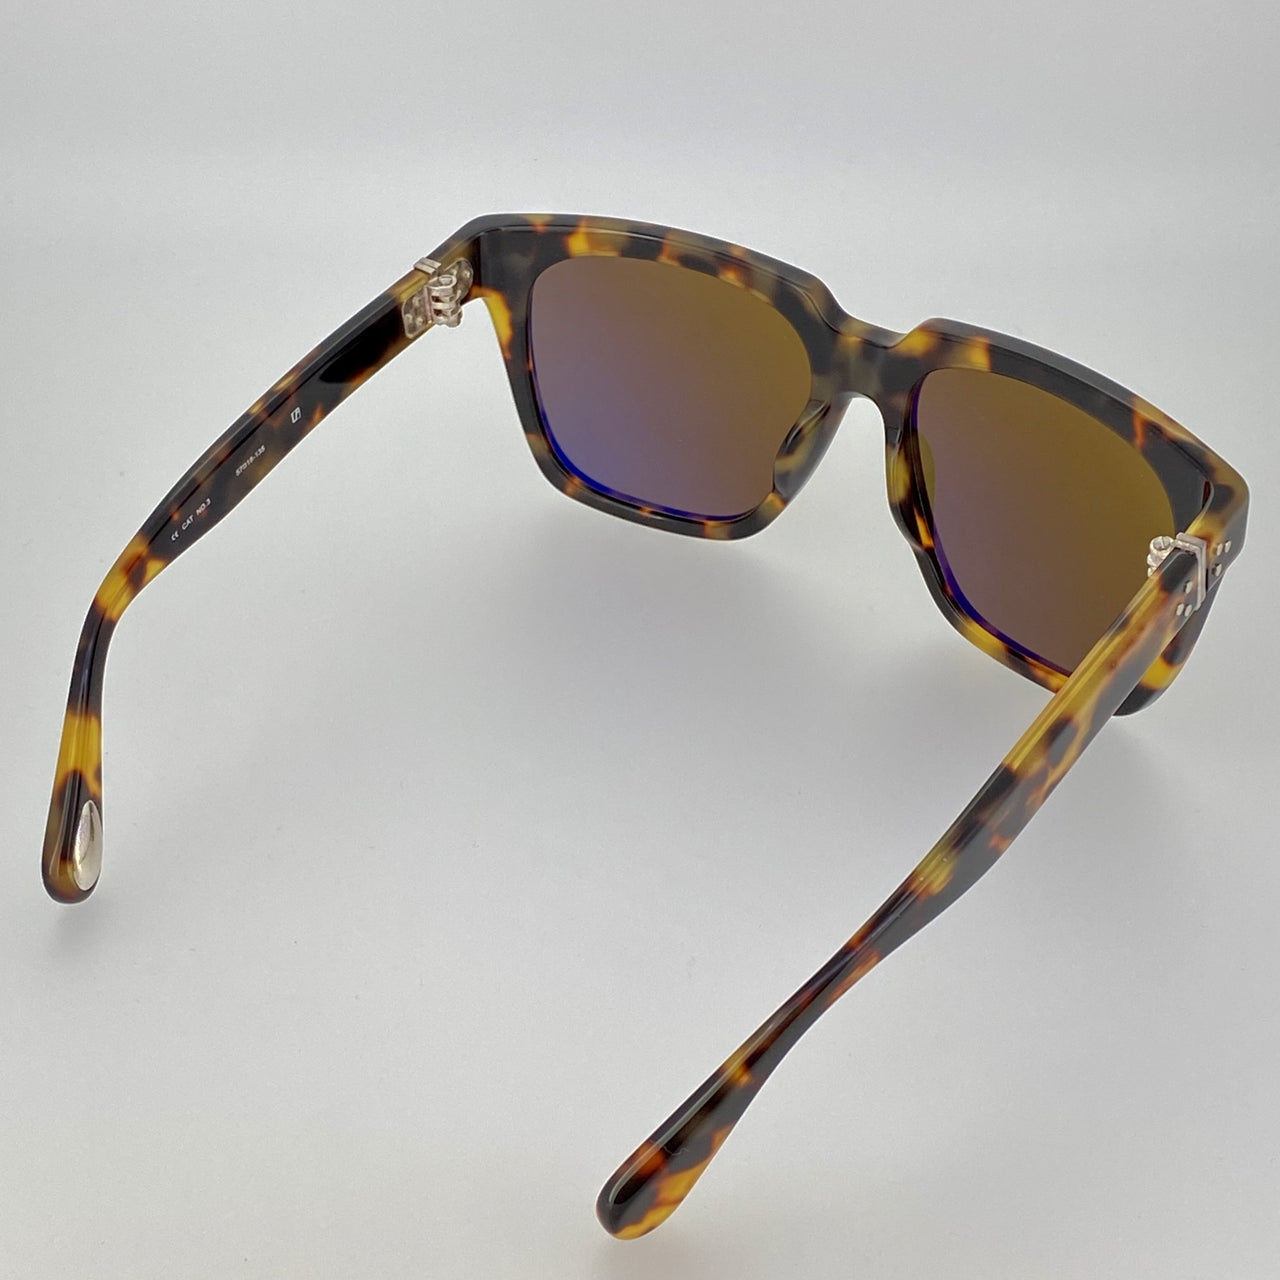 Ann Demeulemeester Sunglasses Oversized Tortoise Shell with Brown Lenses CAT3 AD21C2SUN - Watches & Crystals